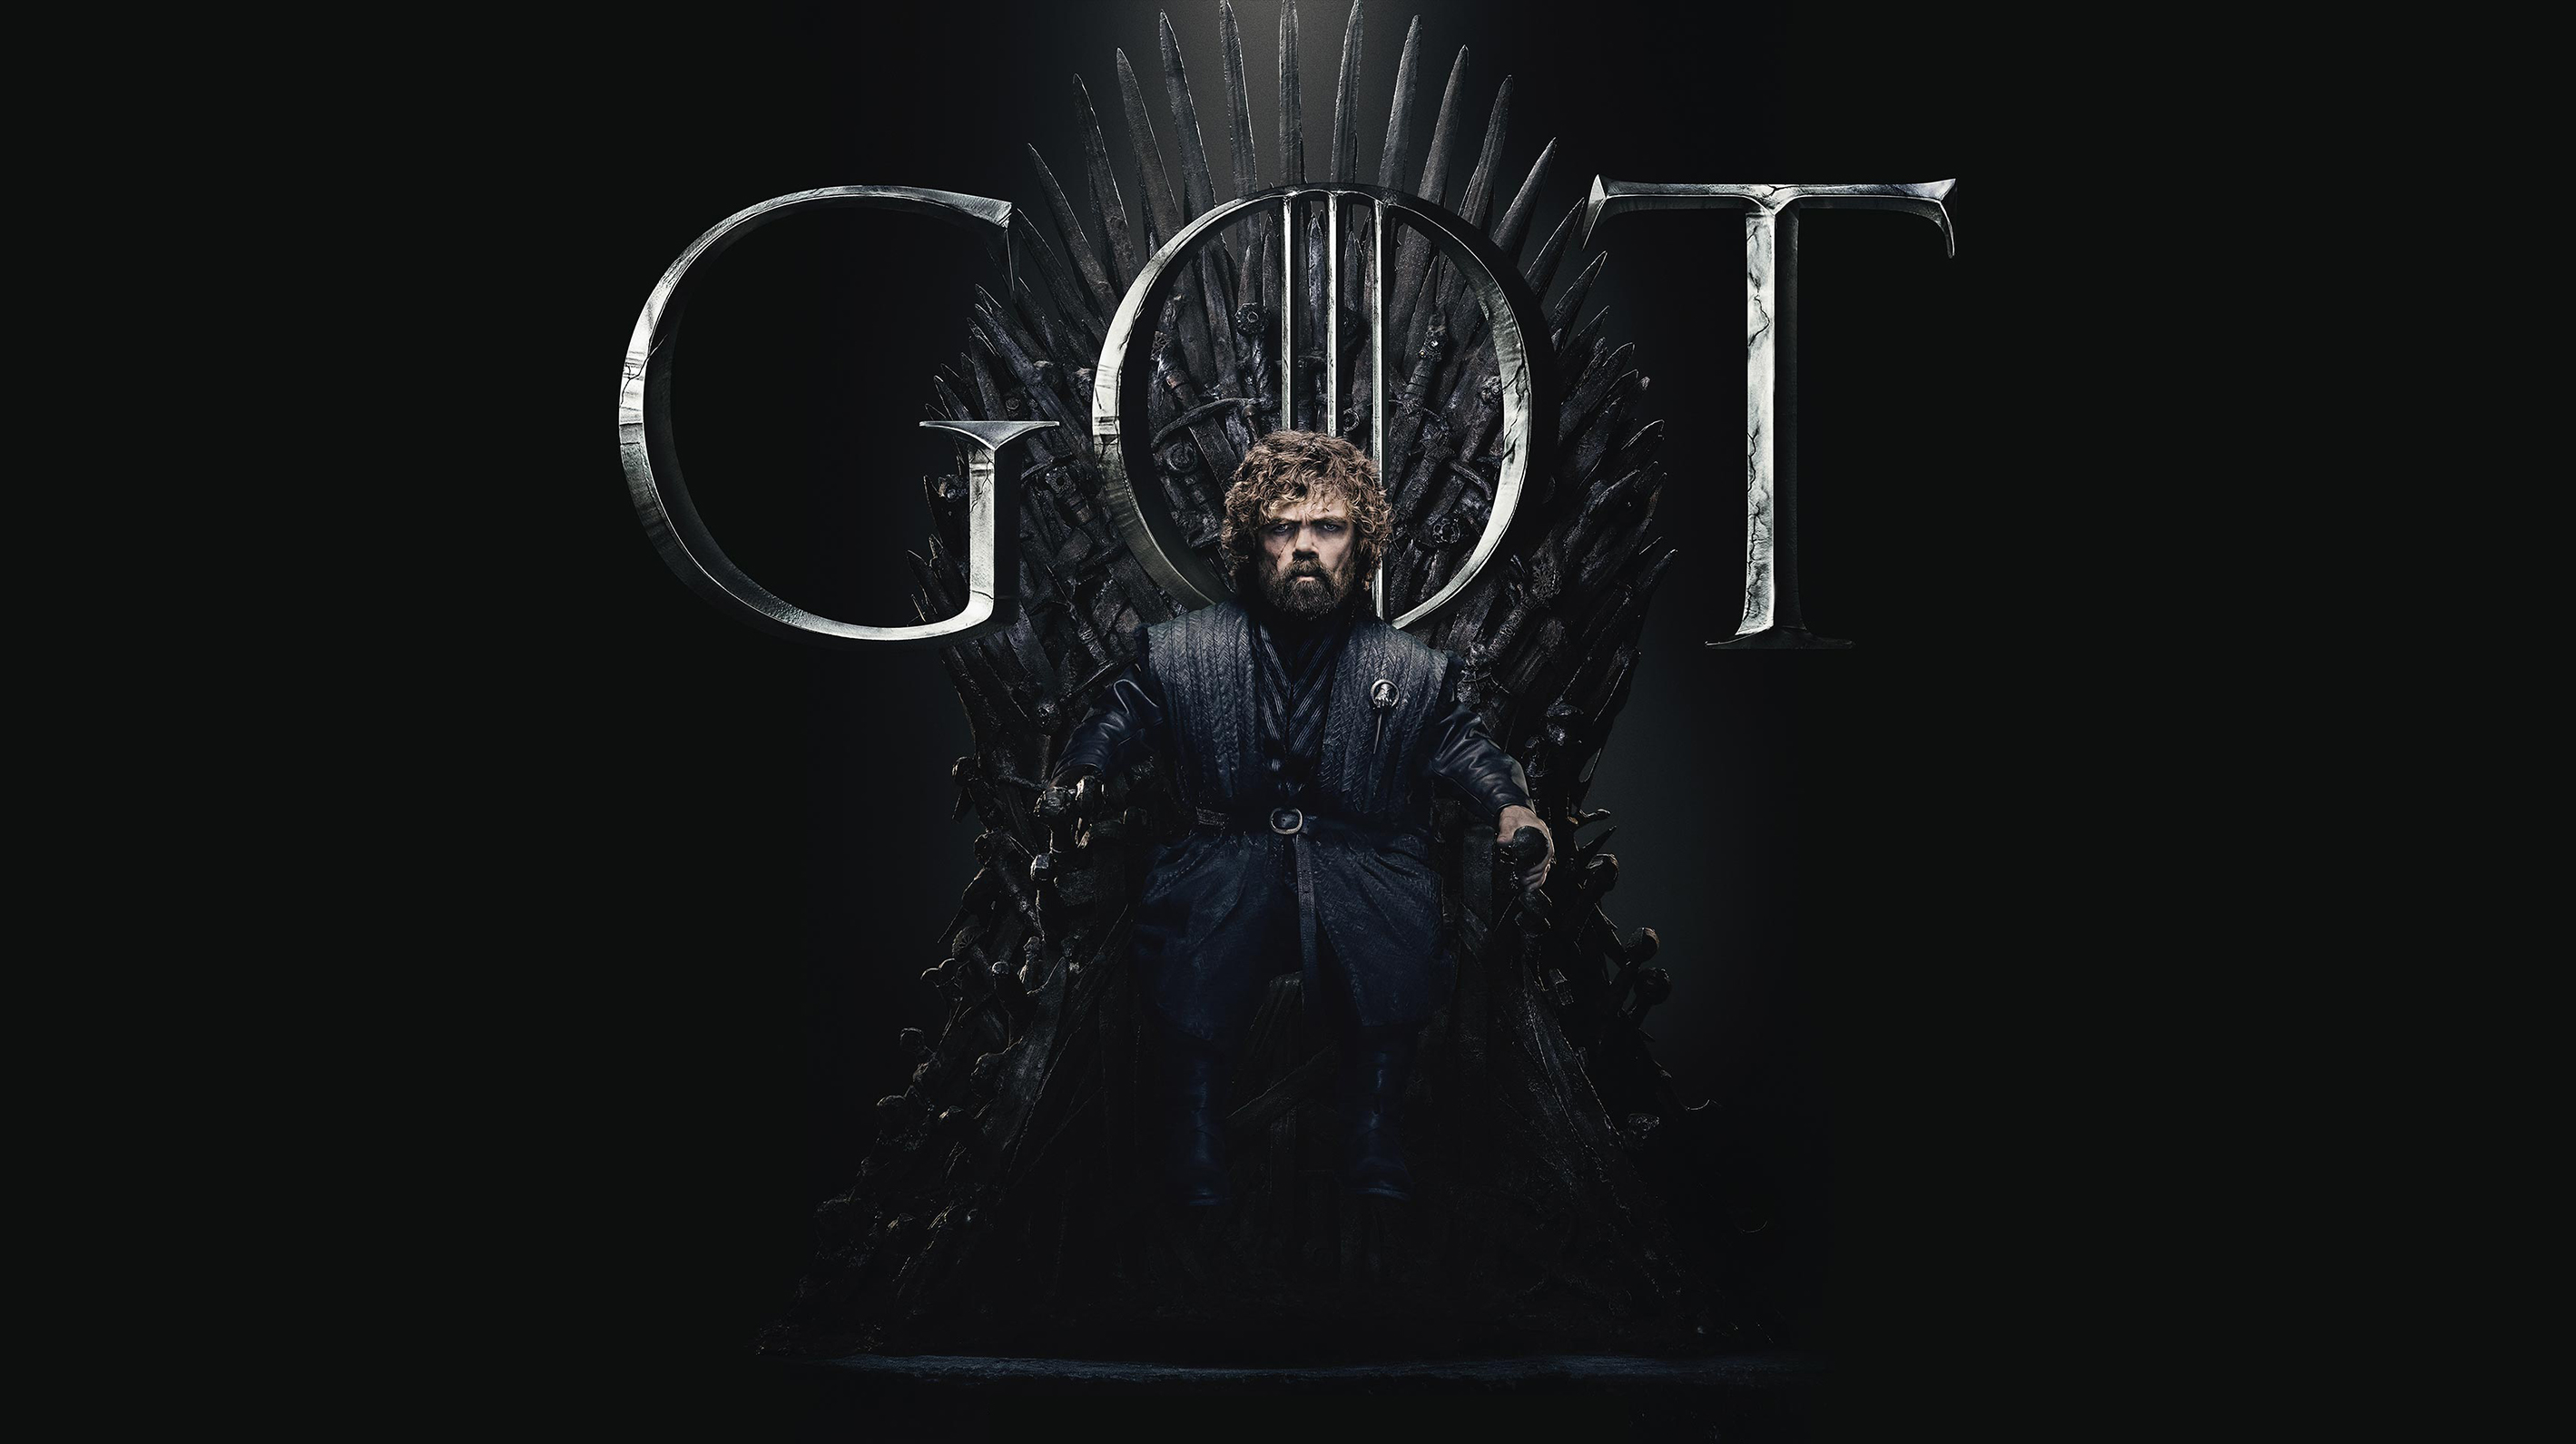 High Resolution Game Of Thrones Season 8 Wallpaper 1920x1080 Game Of